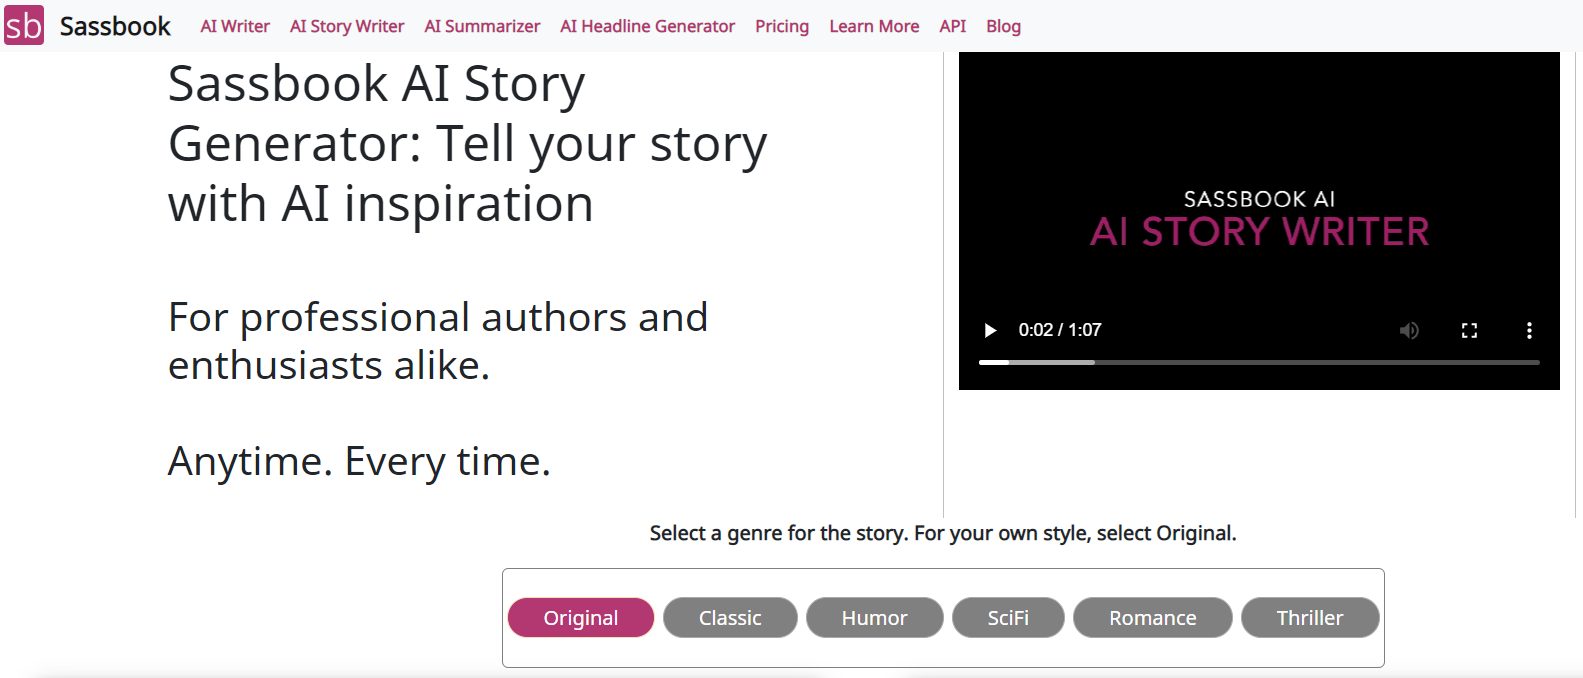 Sassbook AI story generator and writing tool can help book writing.